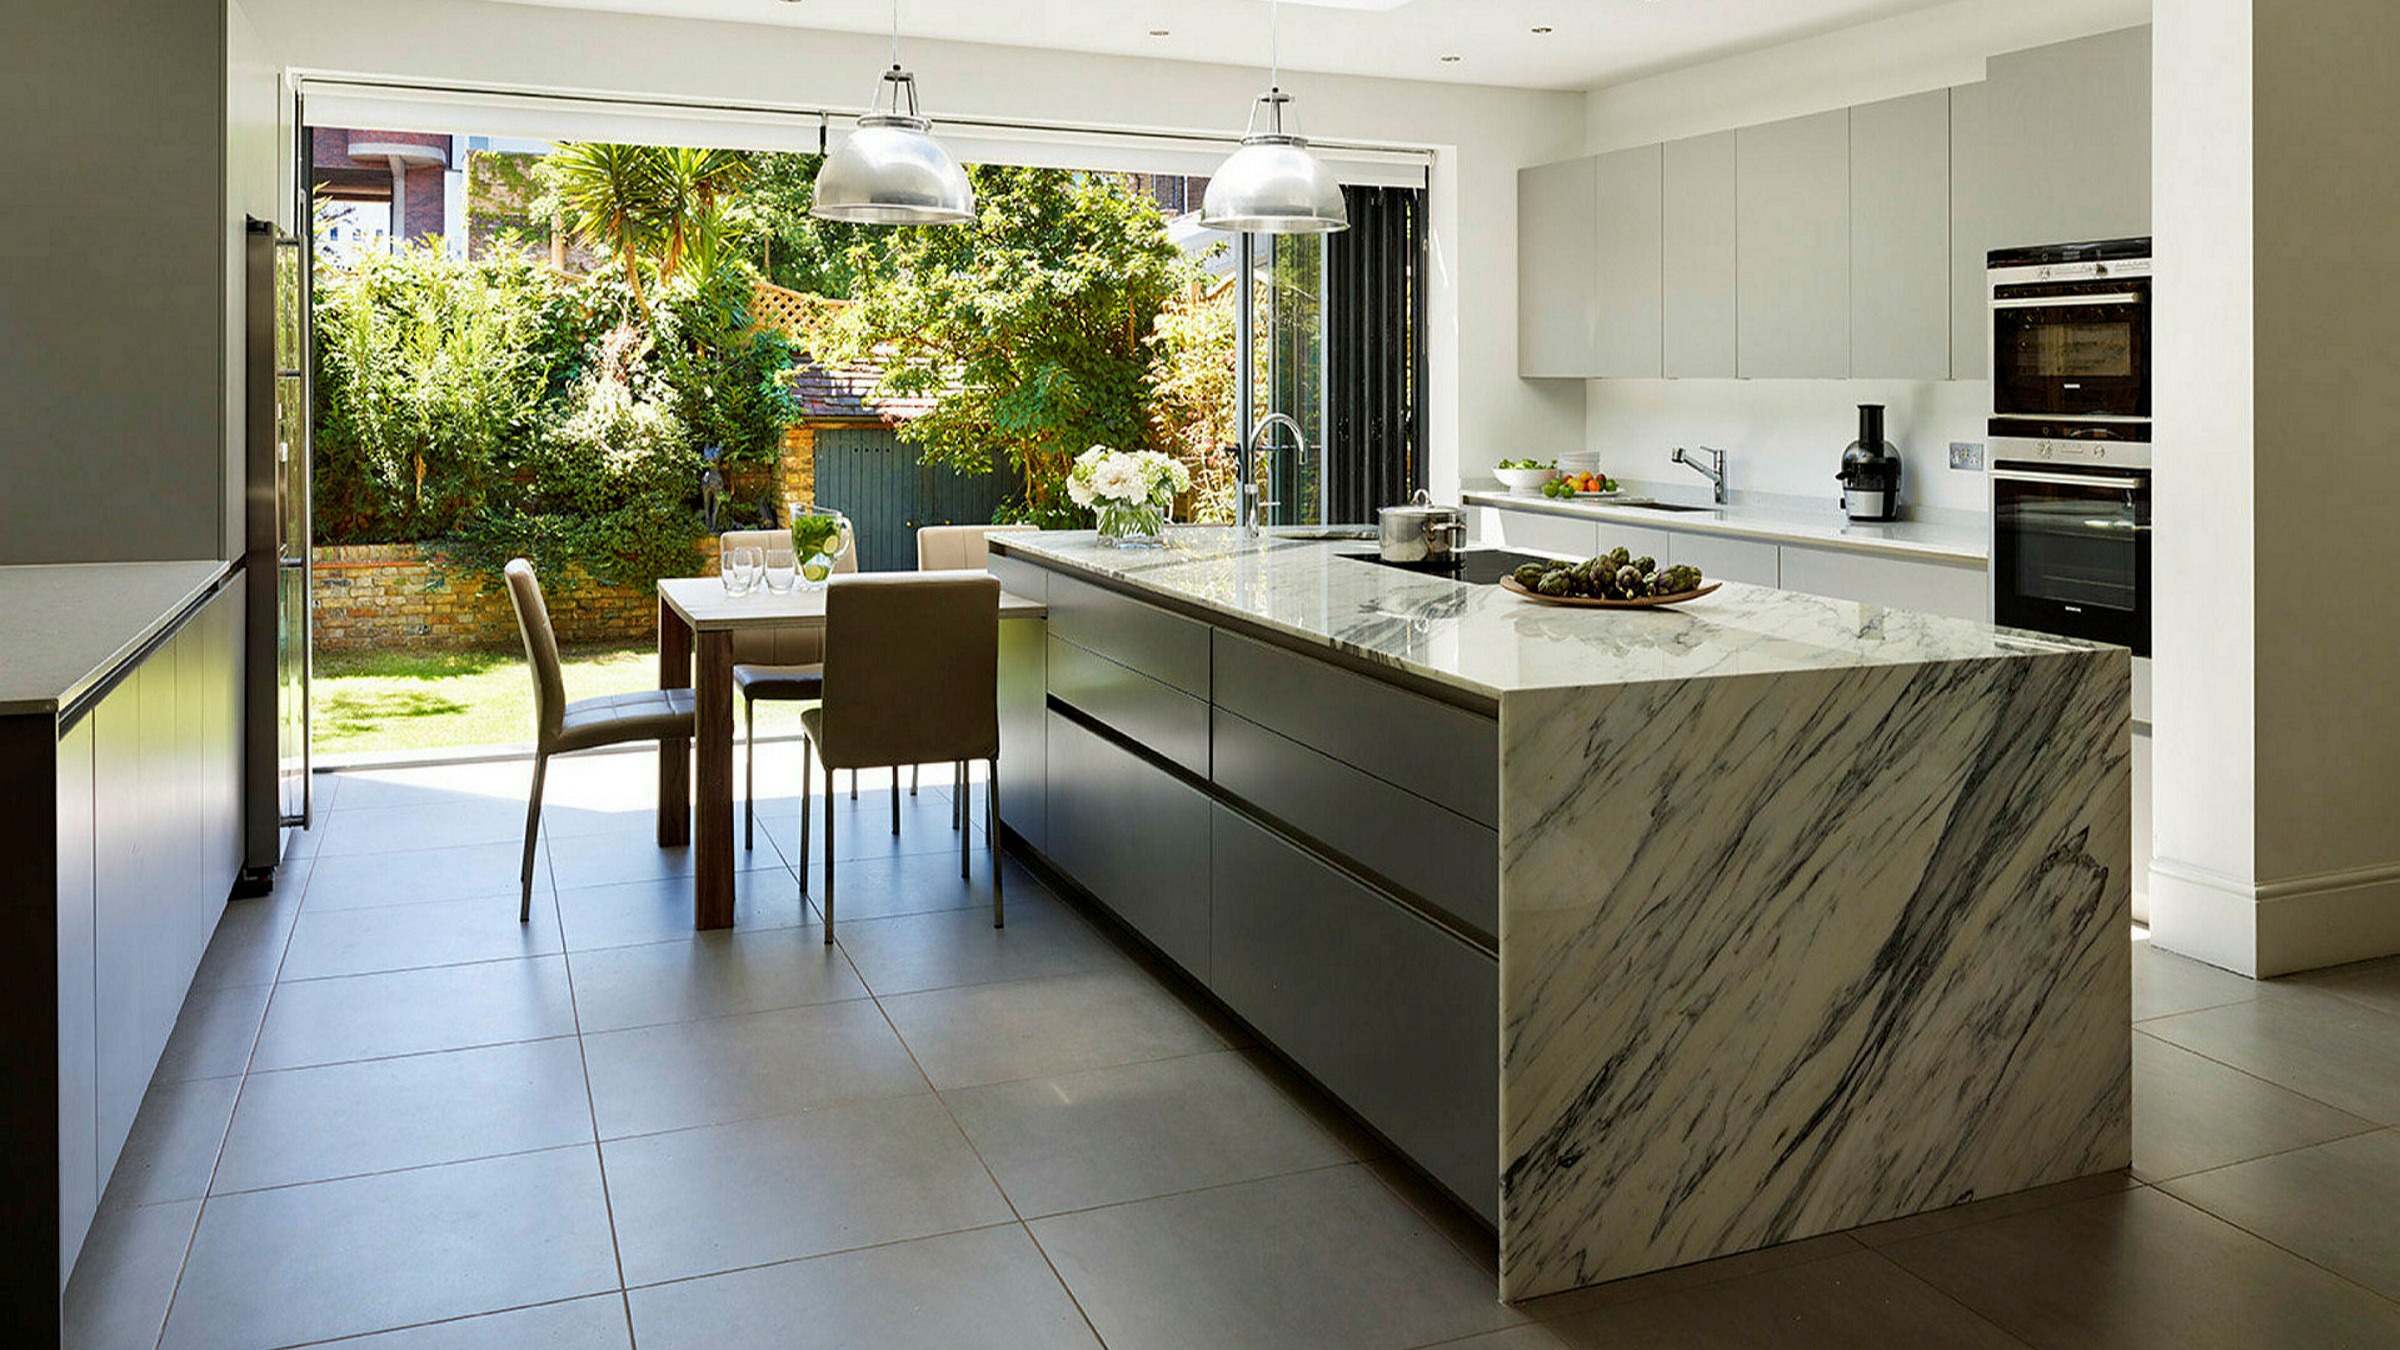 Is granite, quartz or marble better for a kitchen worktop? | Financial Times